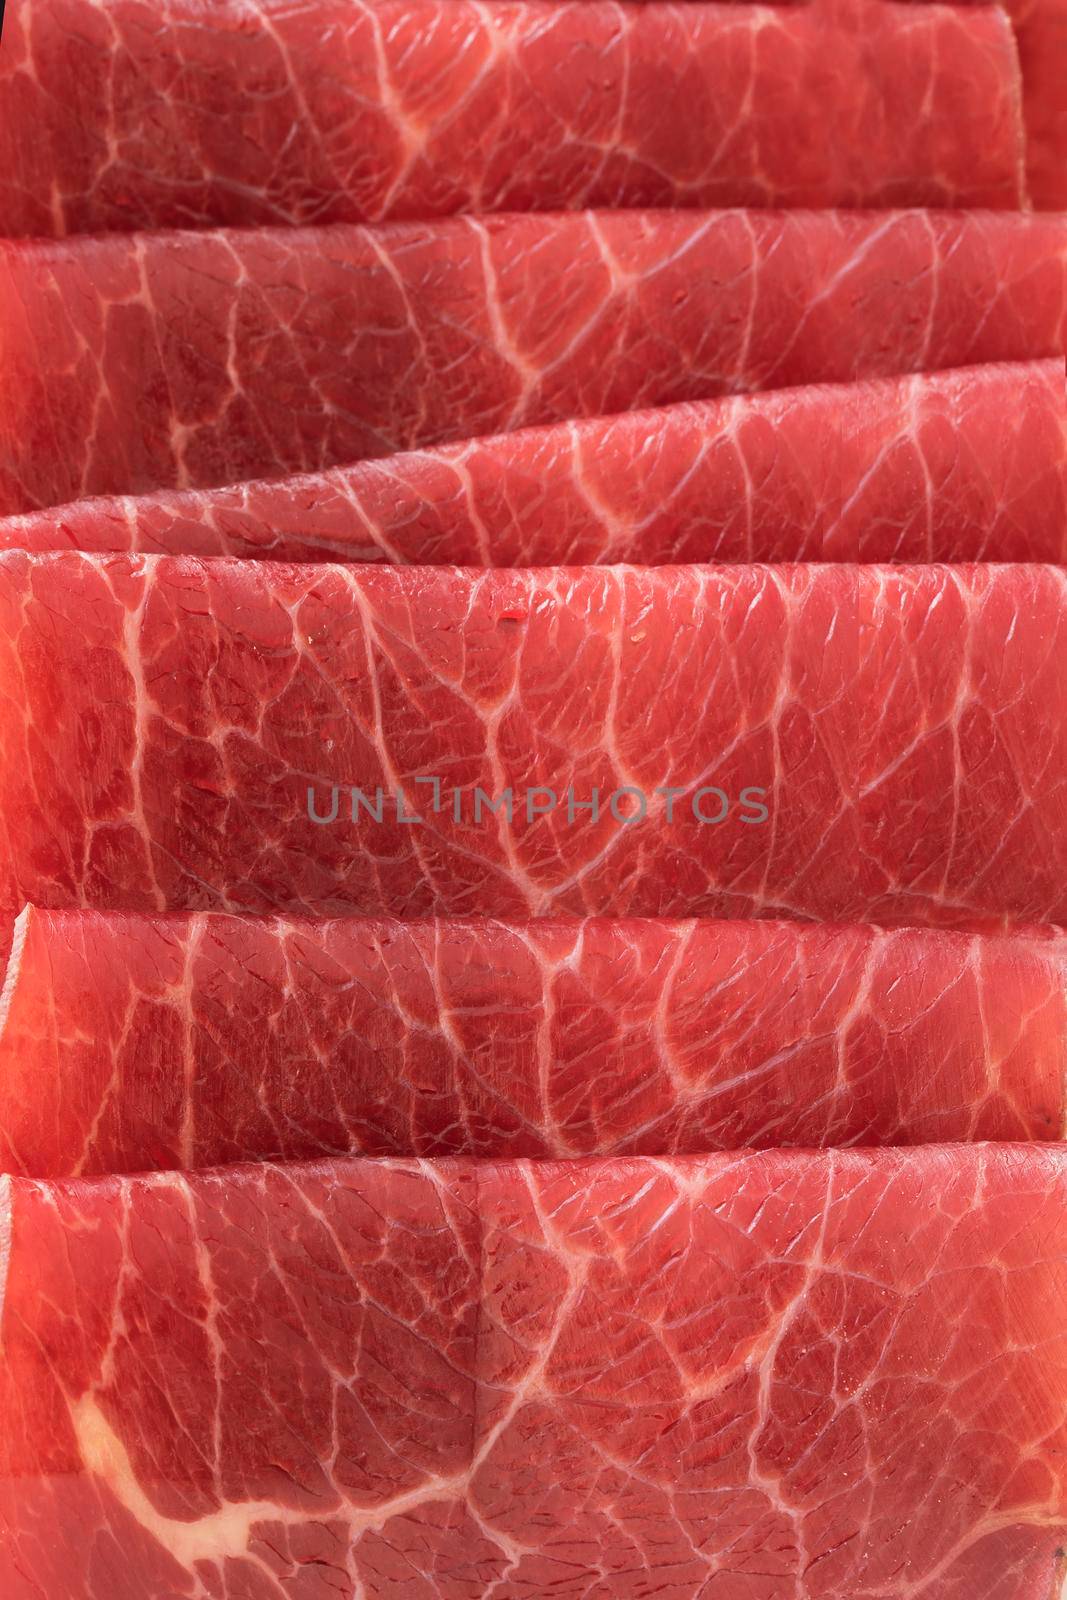 Close up of slices of bresaola, thin sliced cured beef.